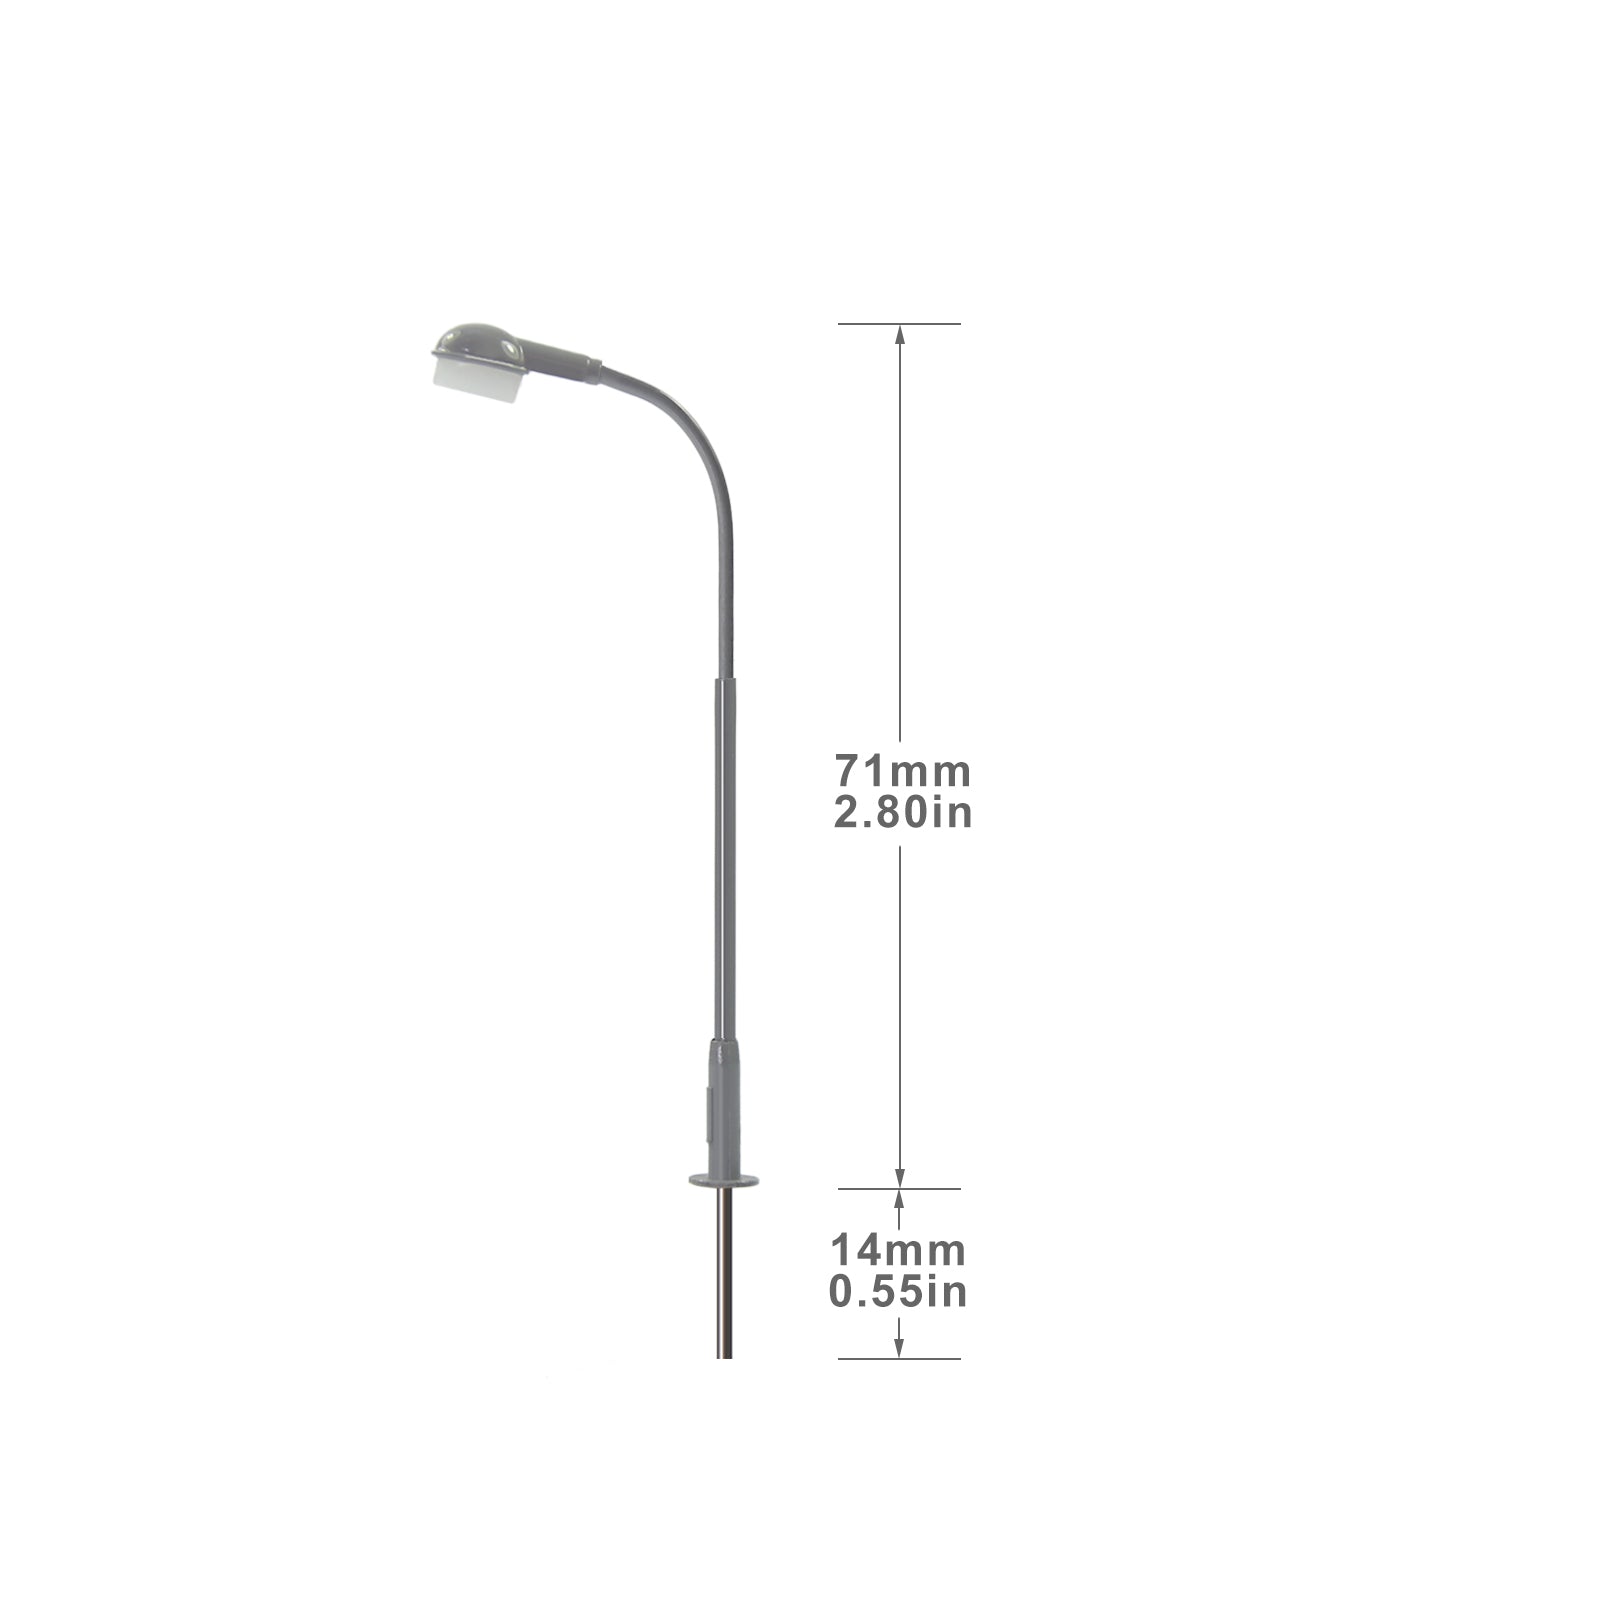 LD10 5pcs Metal Street Light Lamps with Cover LEDs